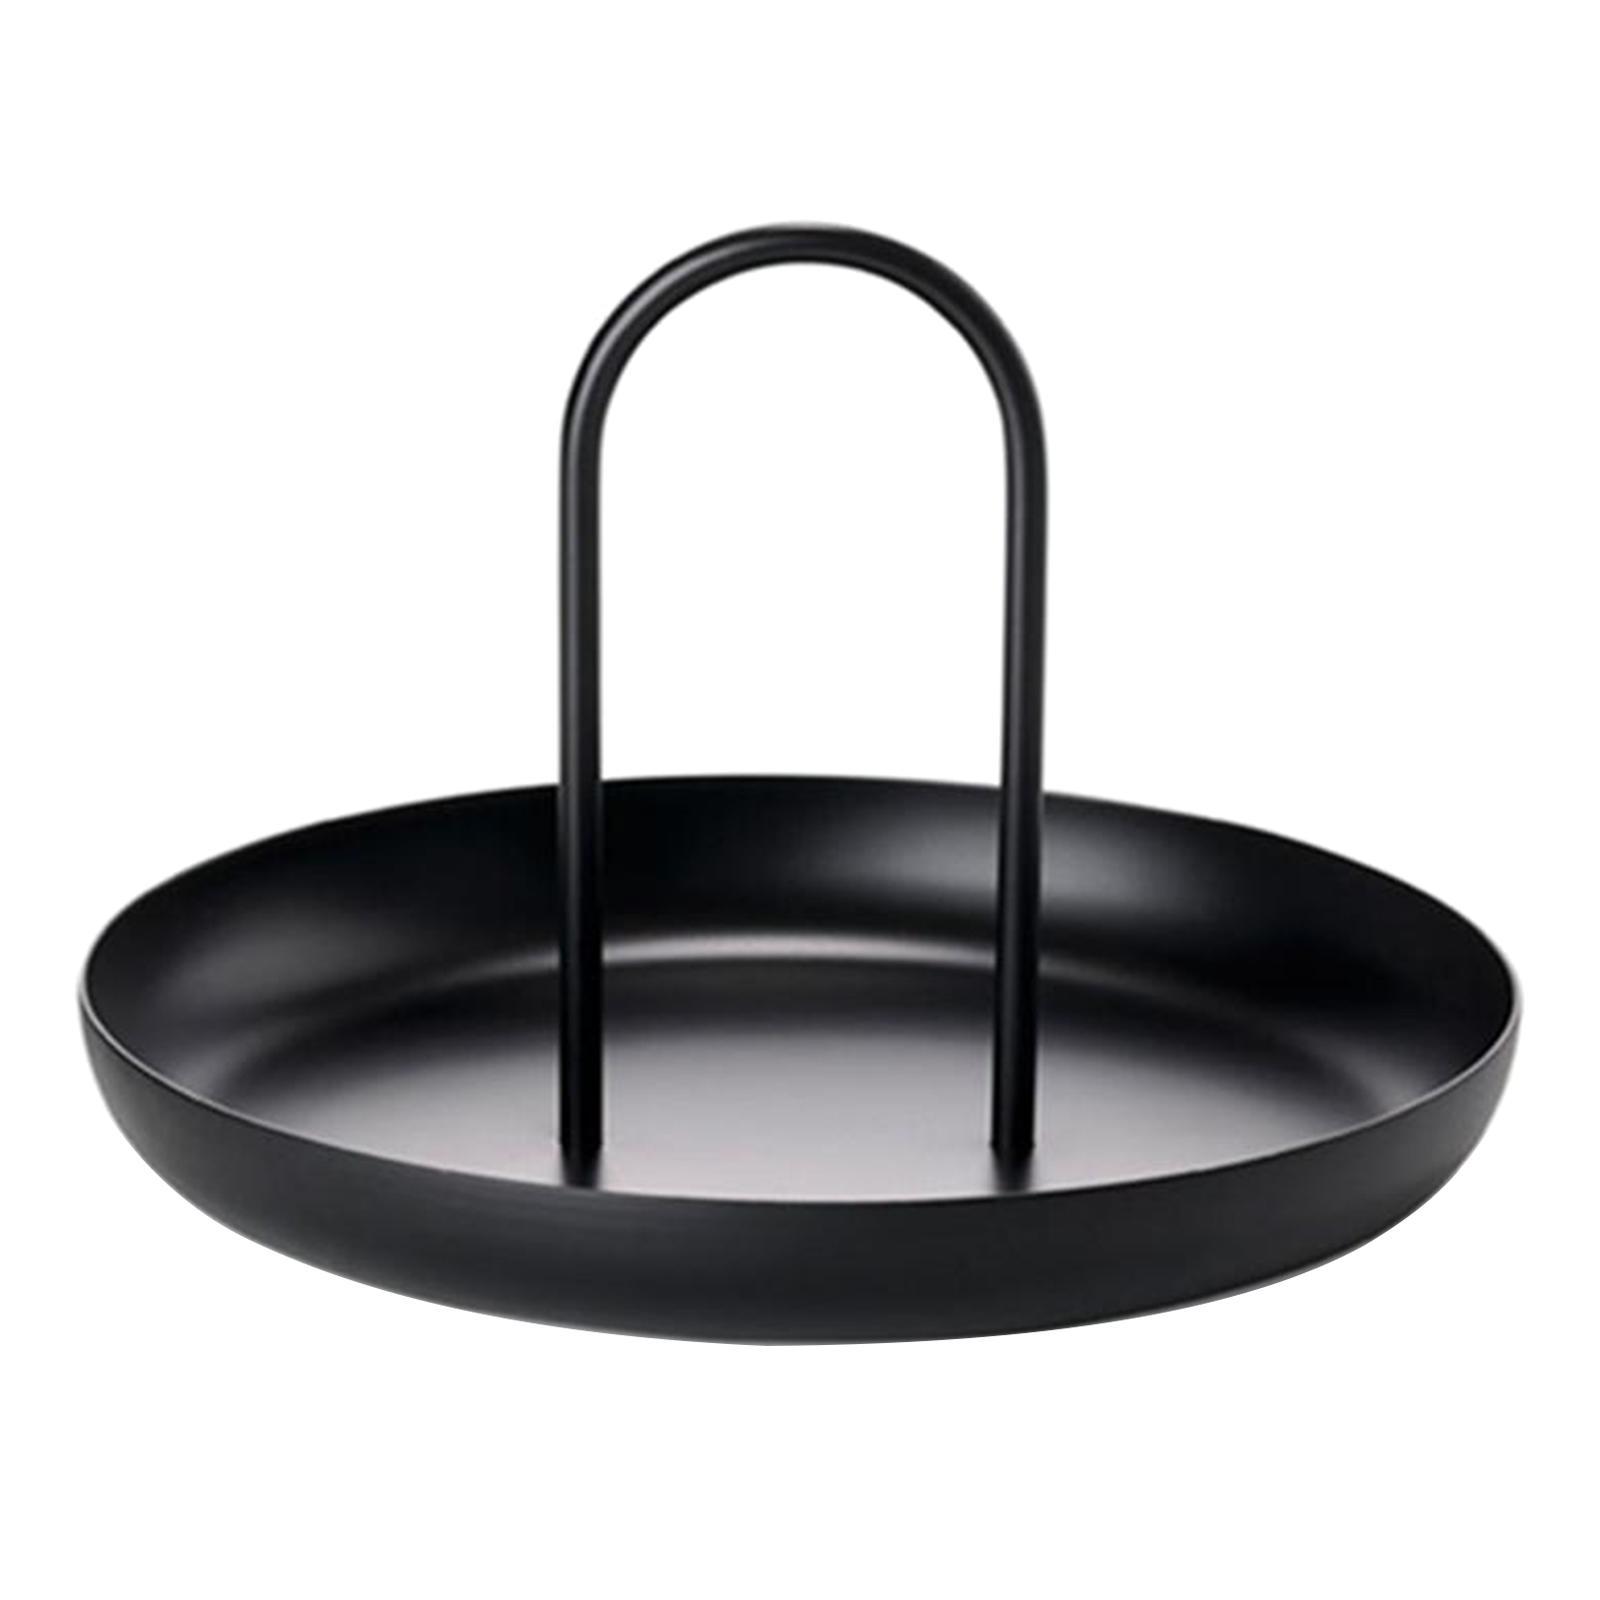 Jewelry Tray Nordic Style Food Snack Cake Tray Plate with Handle Decor Black